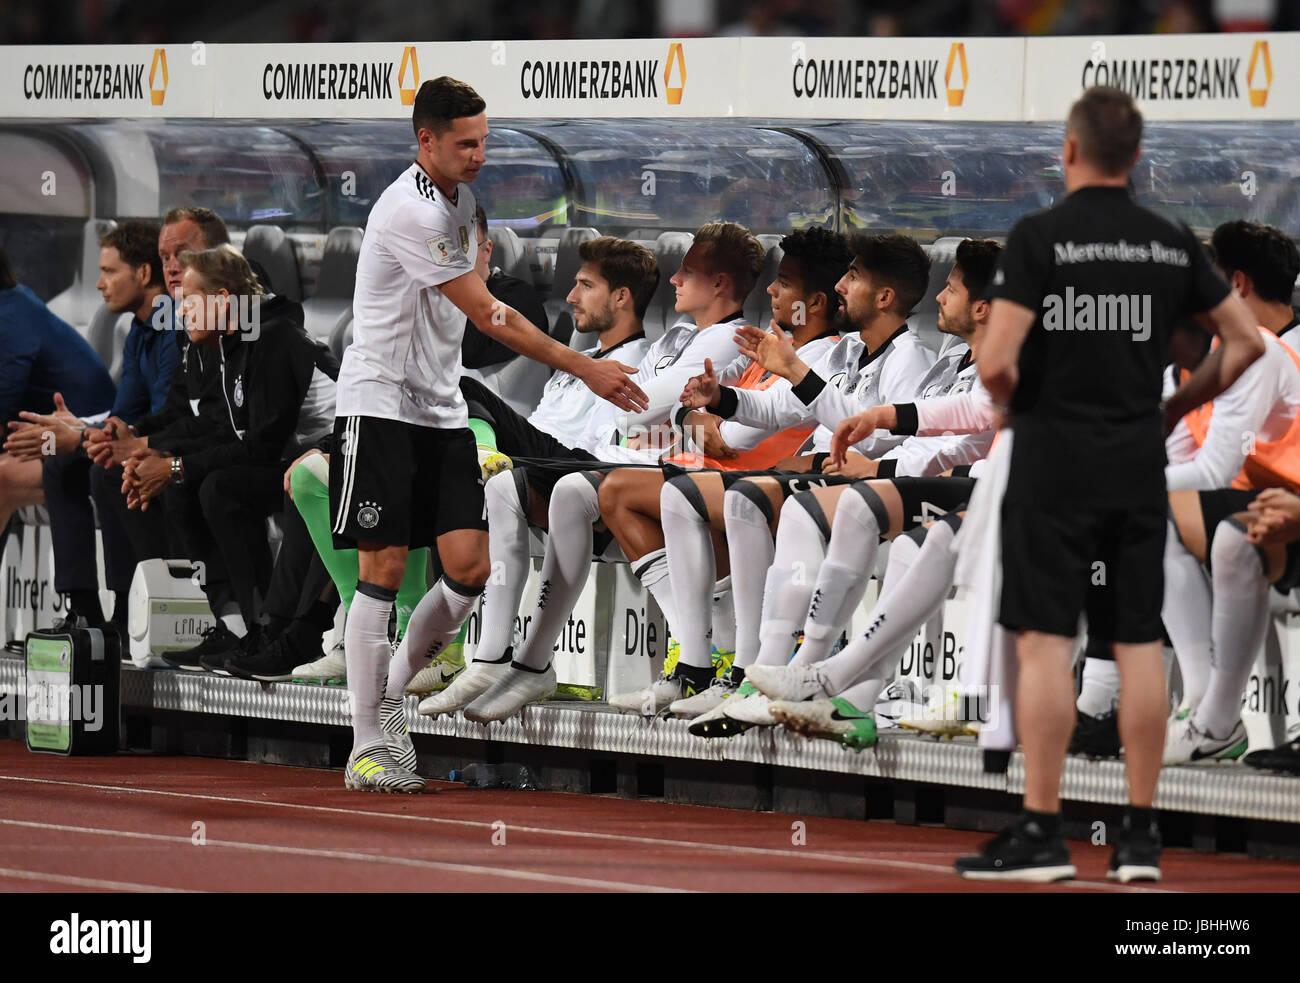 Germany's Julian Draxler (front L) passes the bench upon his substitution during the World Cup qualifying group C soccer match between Germany and San Marino in Nuremberg, Germany, 10 June 2017. Photo: Sven Hoppe/dpa Stock Photo